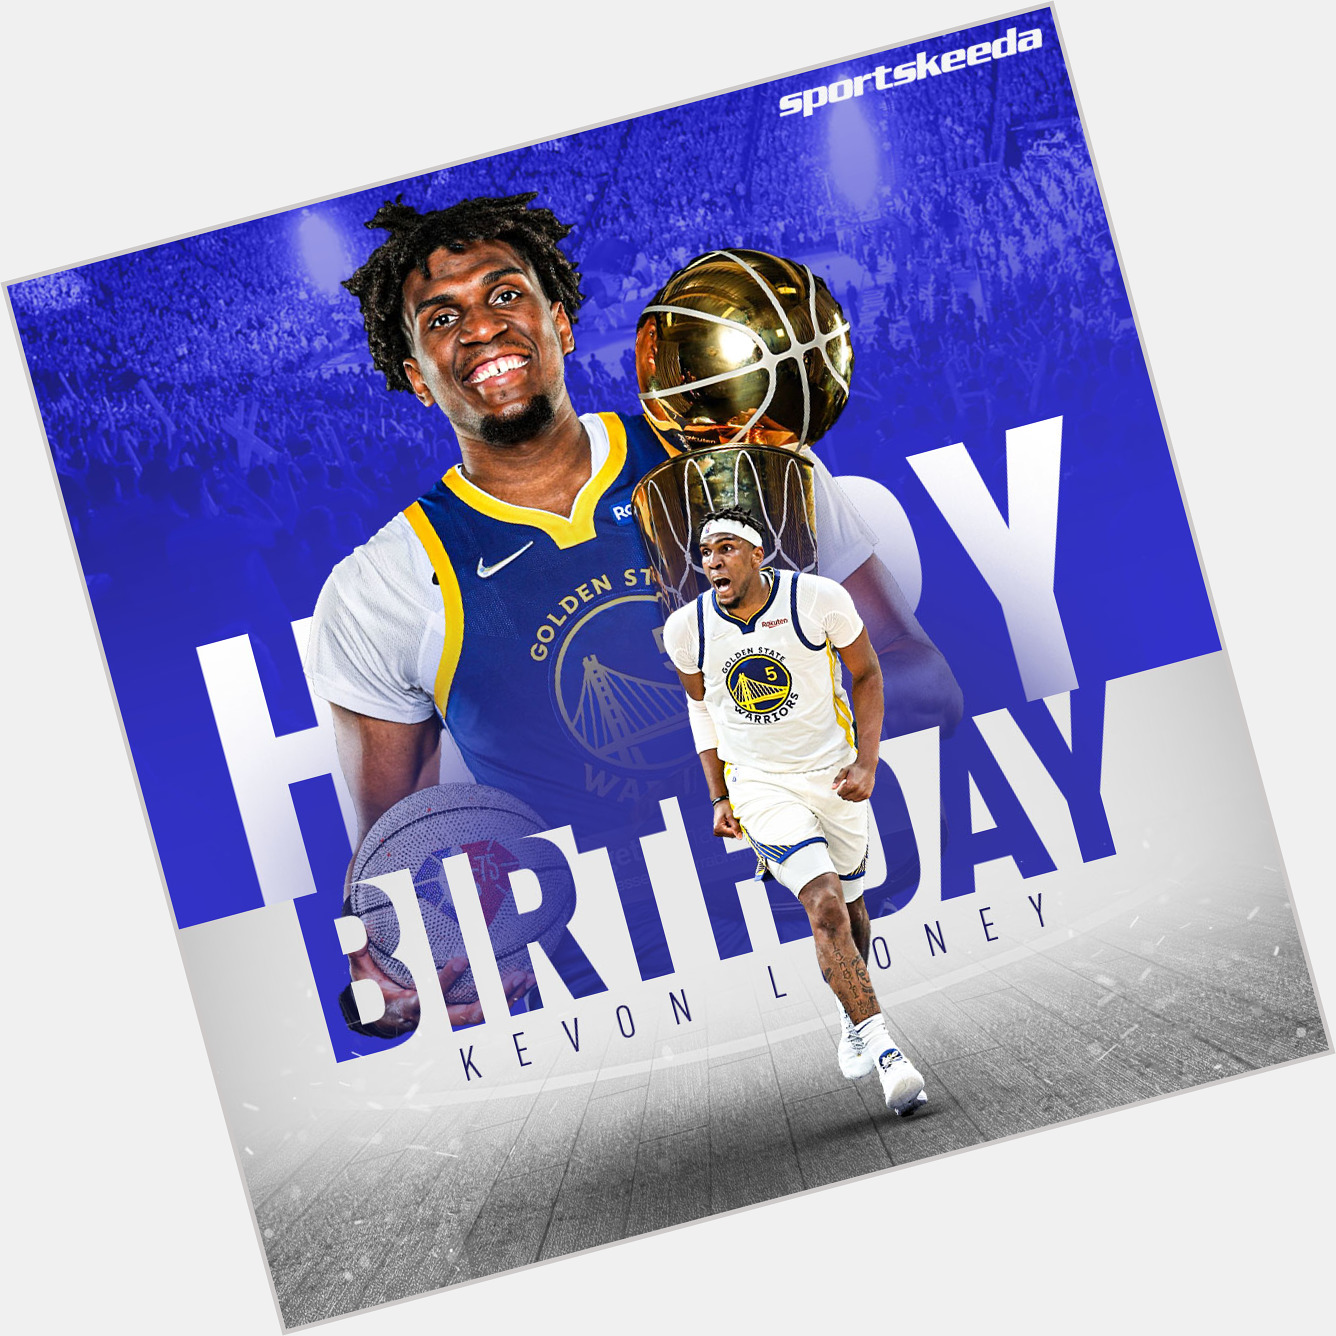 Join us in wishing a Happy 26th Birthday to 3-time NBA Champ Kevon Looney!  